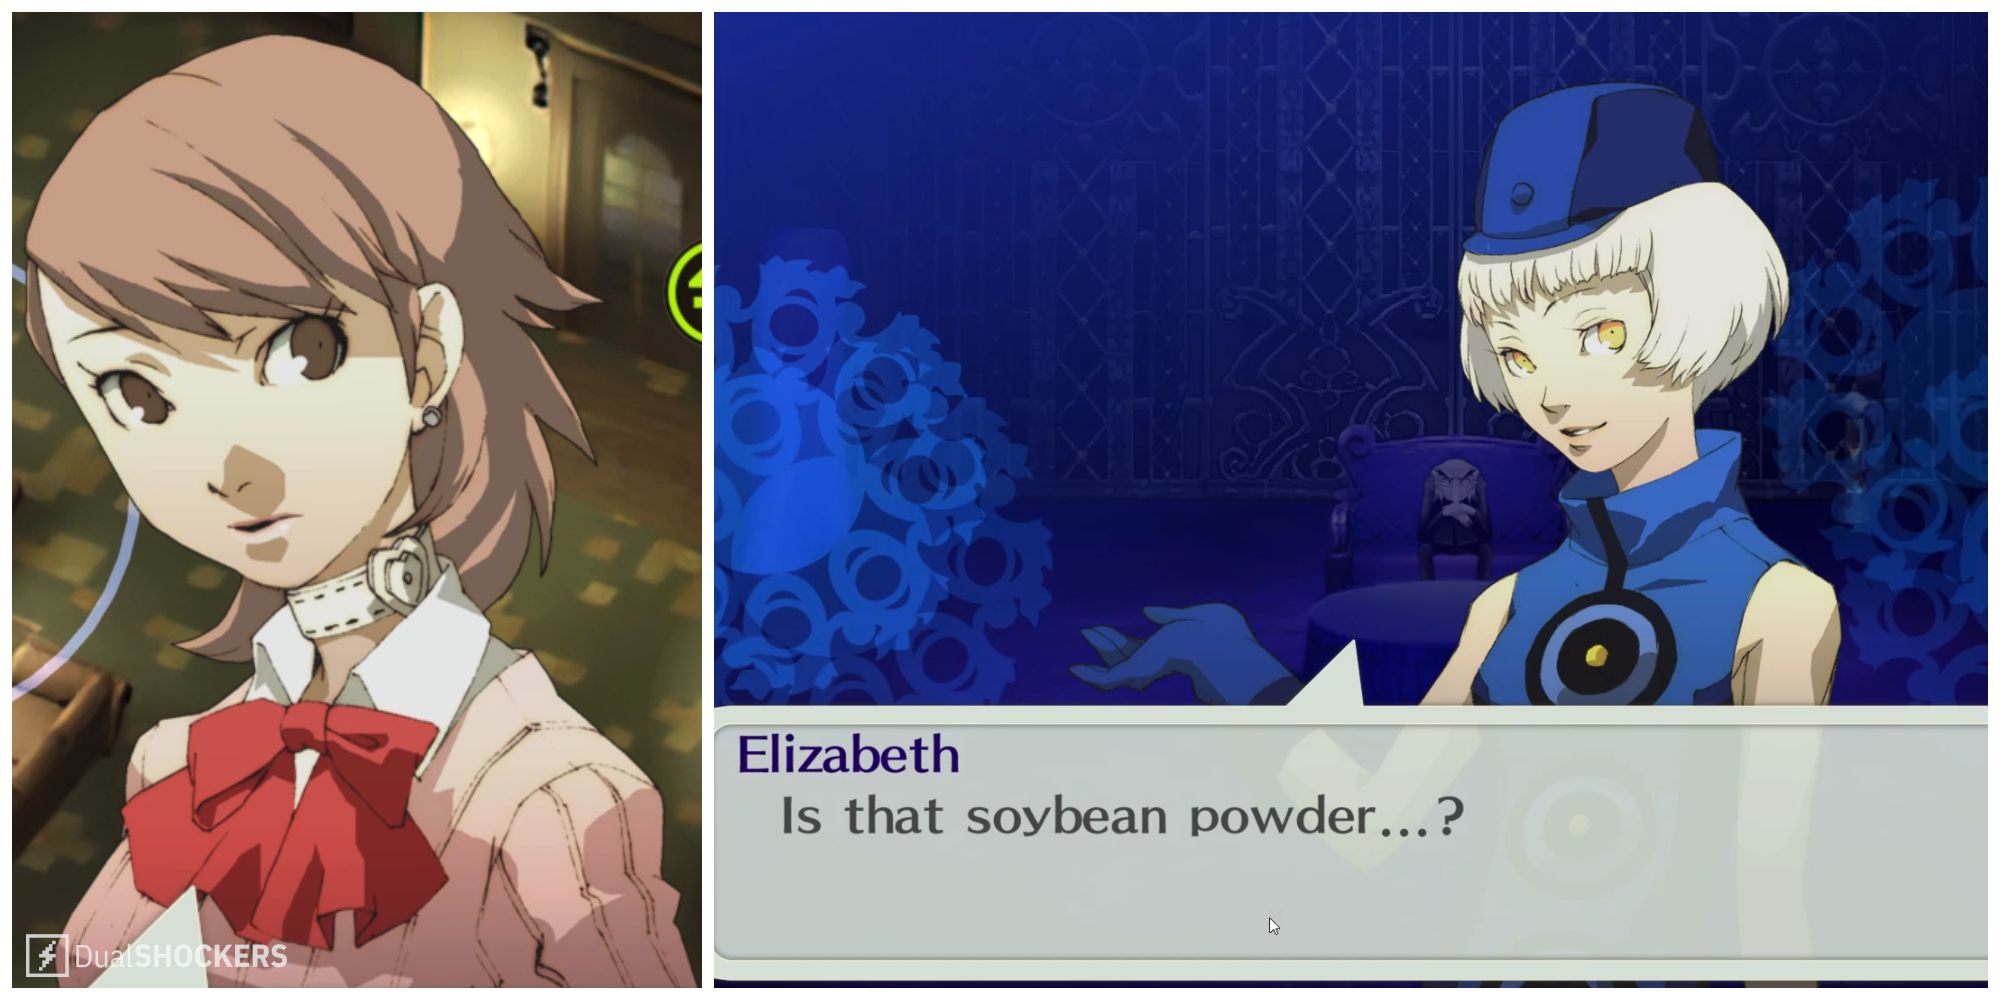 Split image of the character Yukari and Elizabeth after giving her the Pine Resin in Persona 3 Portable.